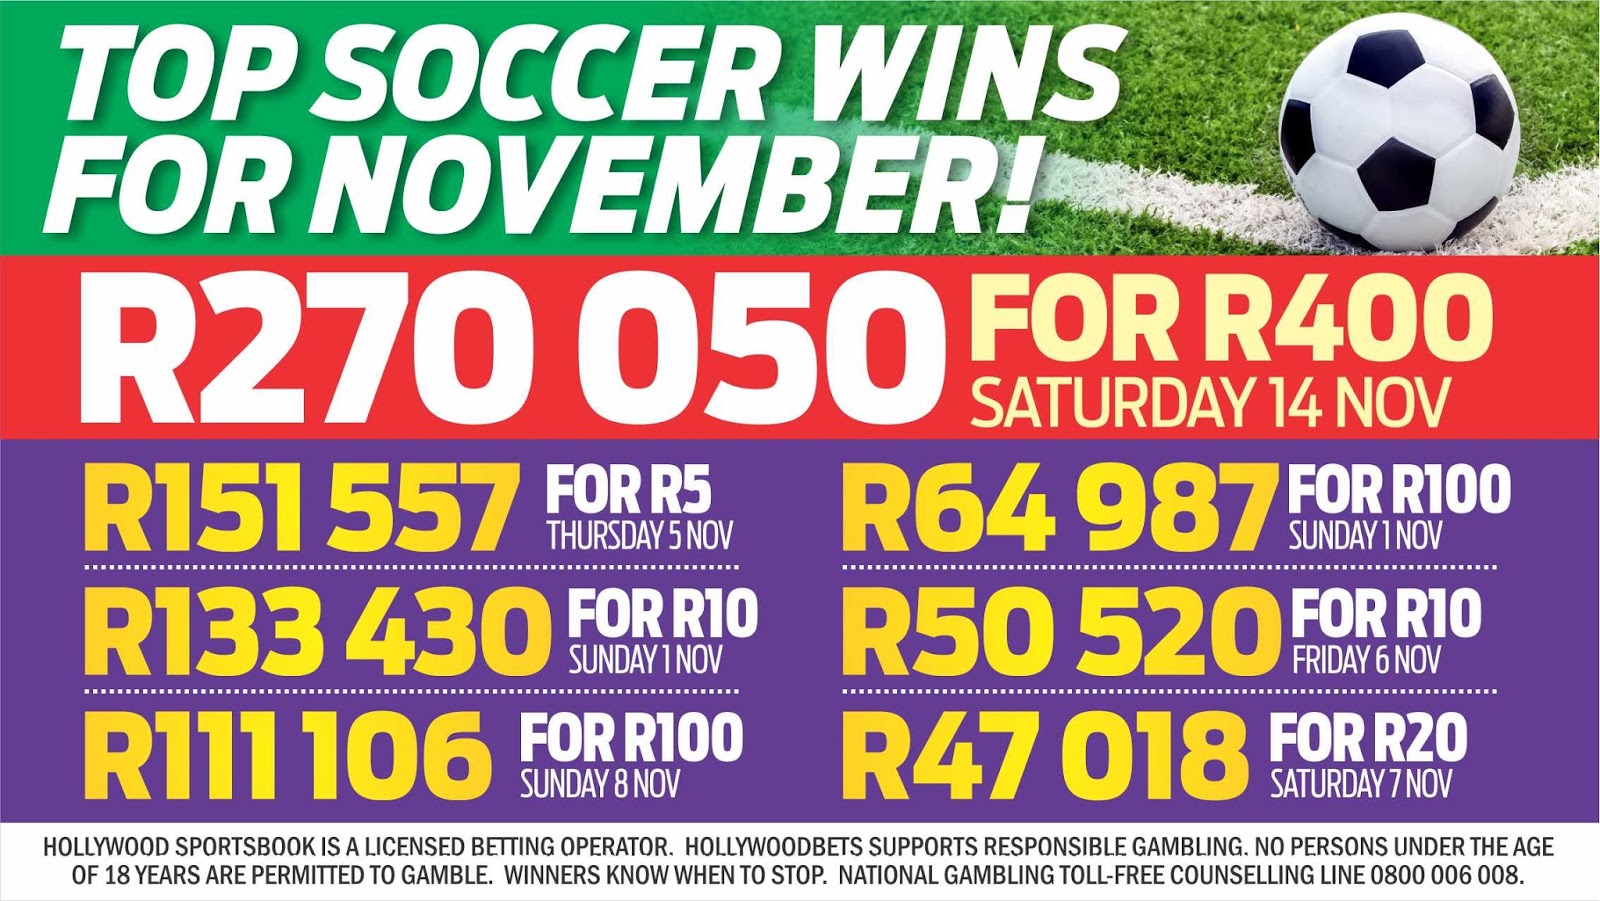 Hollywoodbets Top Soccer Wins Betting November 1